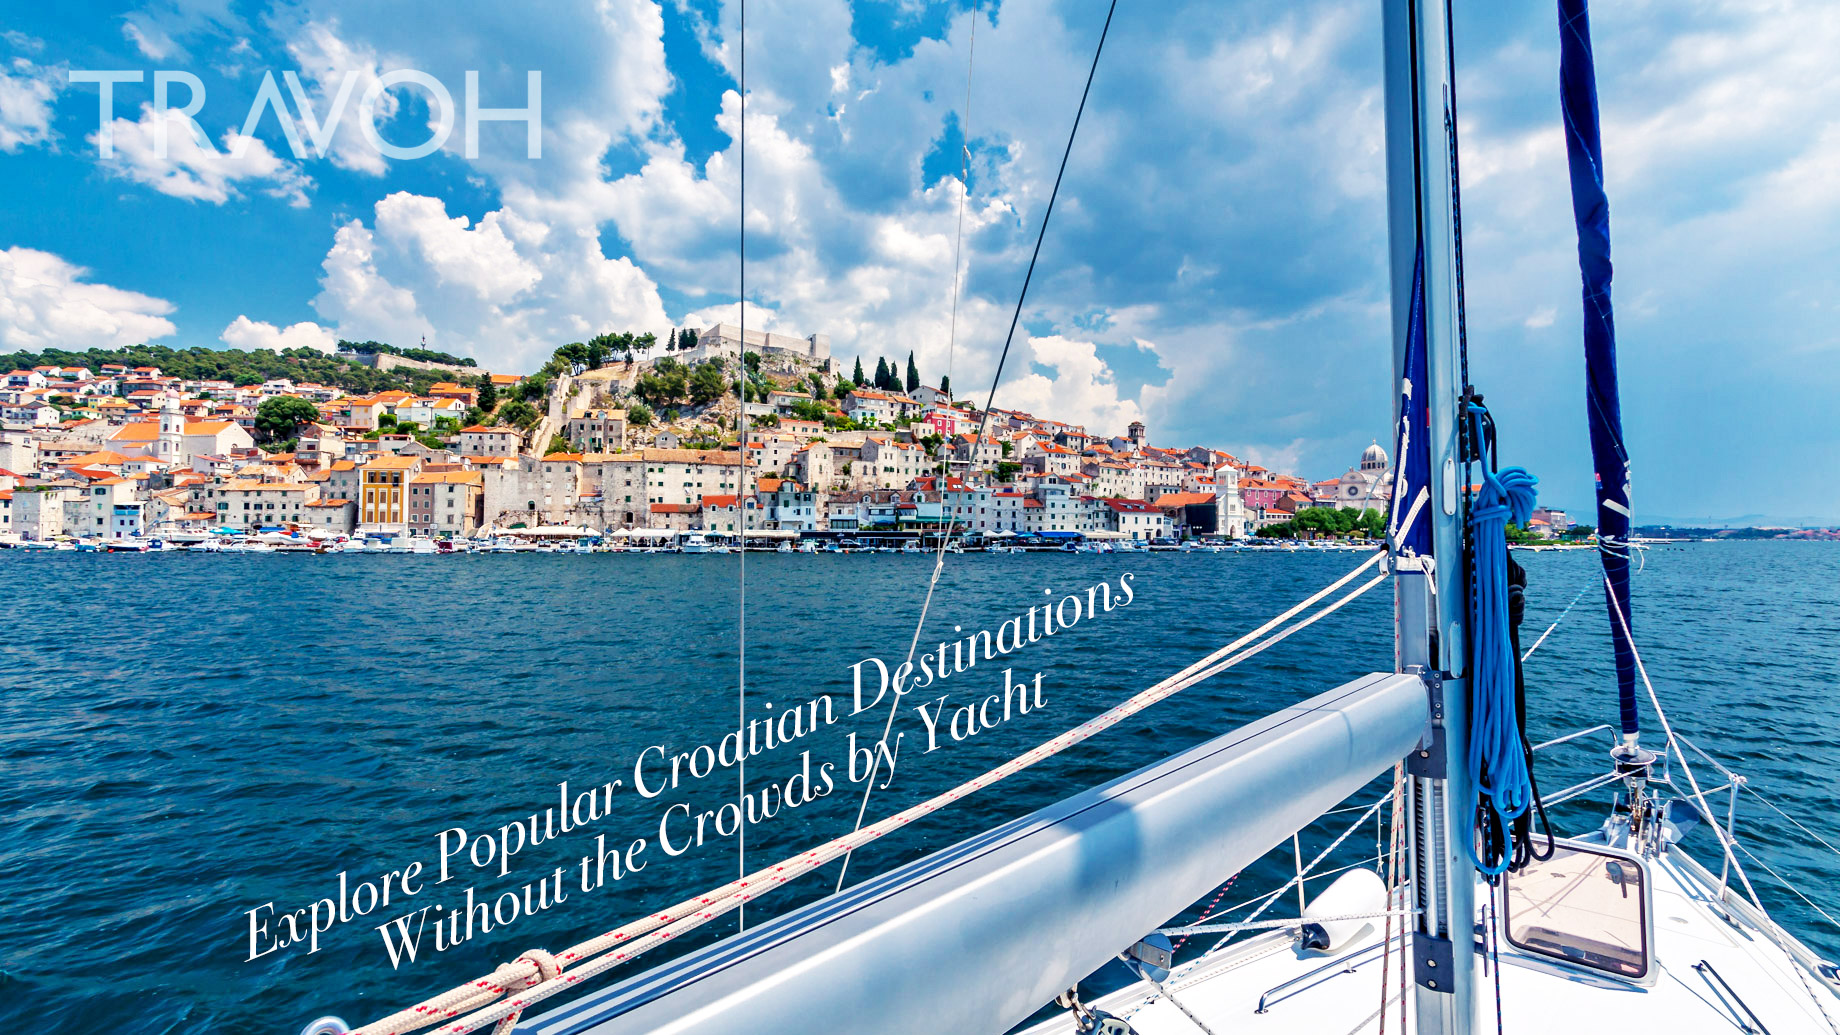 Explore Popular Croatian Destinations Without the Crowds by Yacht